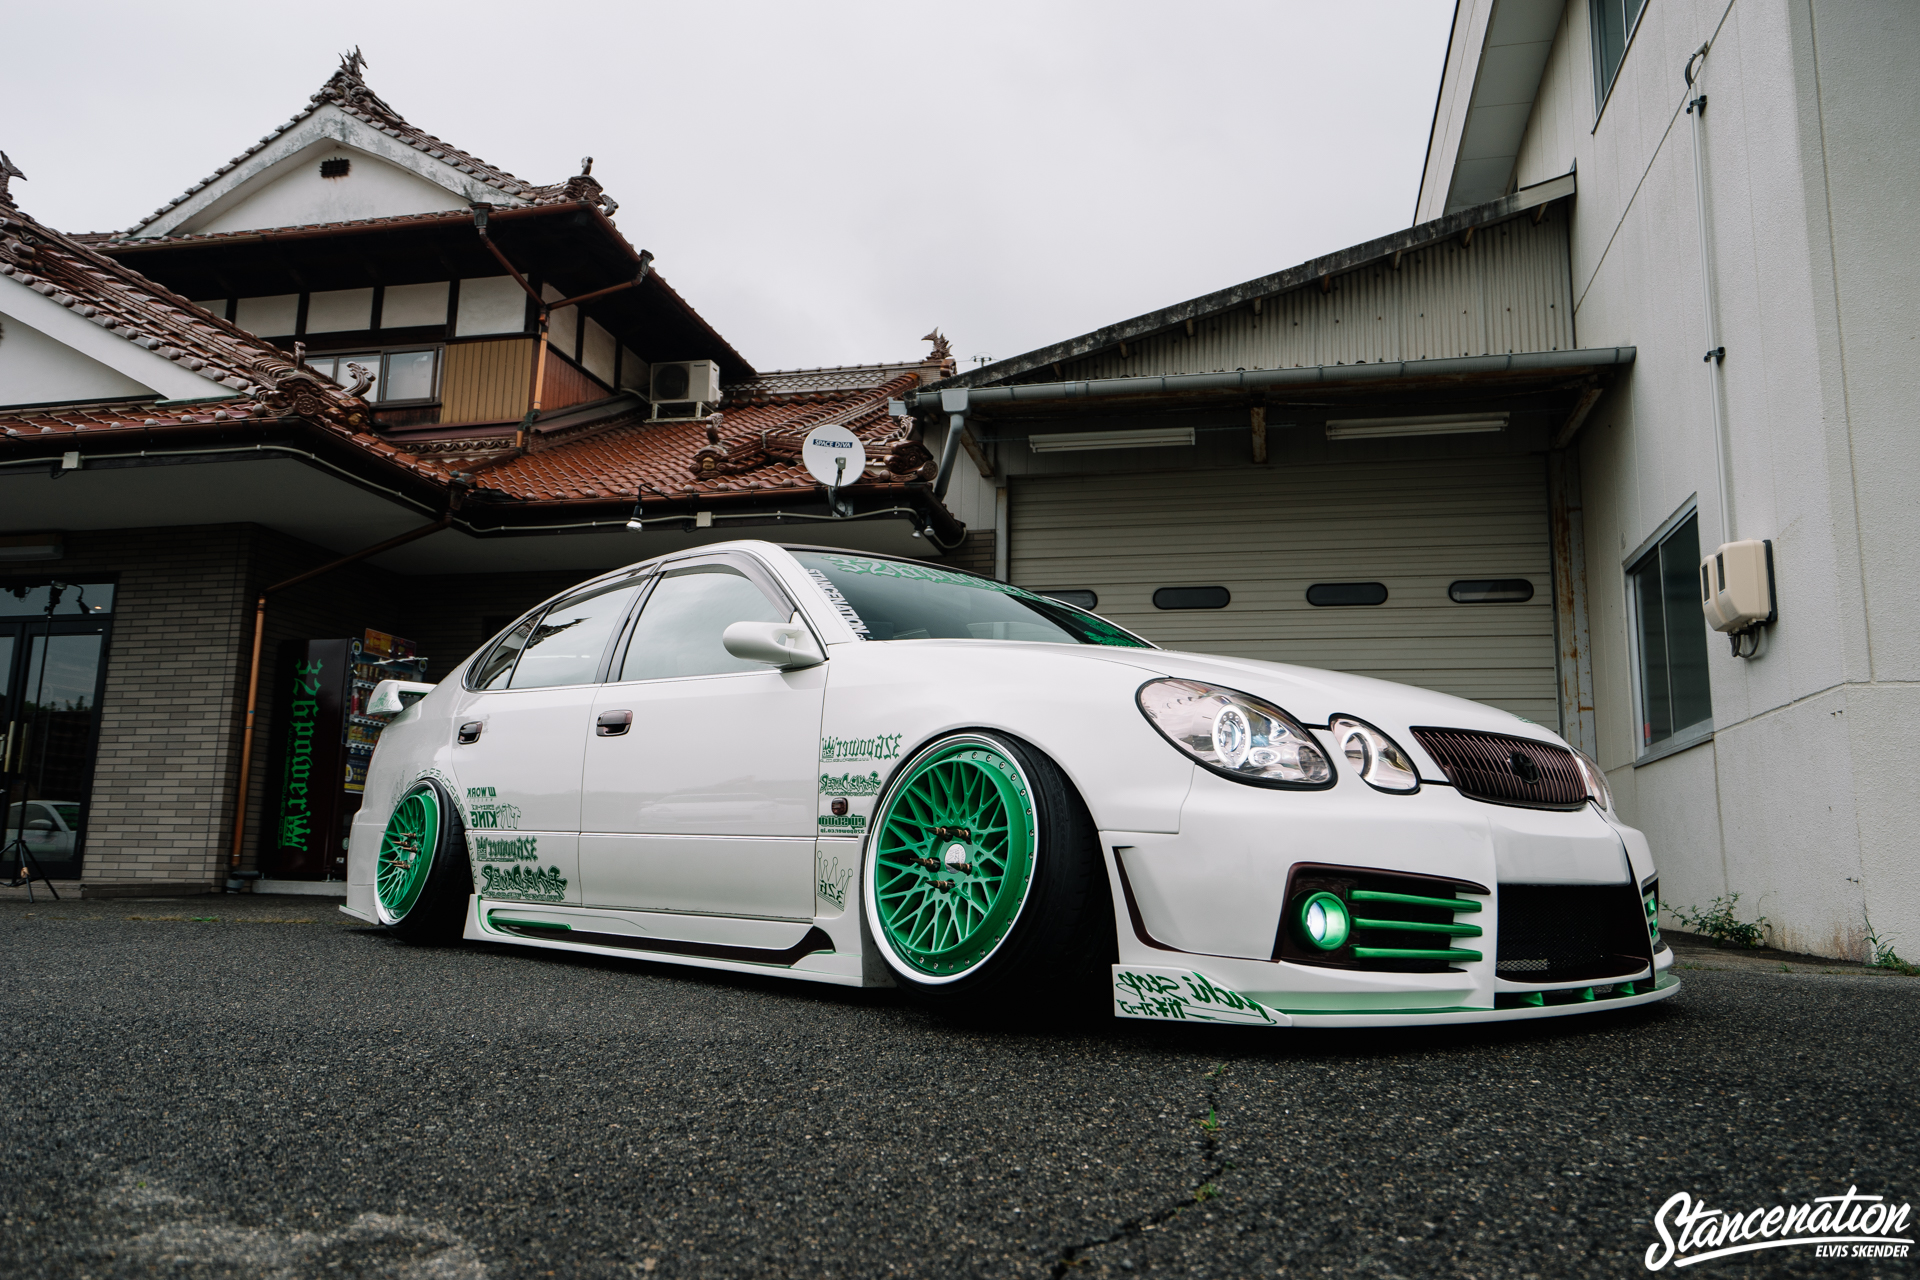 a-closer-look-at-the-326-power-toyota-aristo-stancenation-form